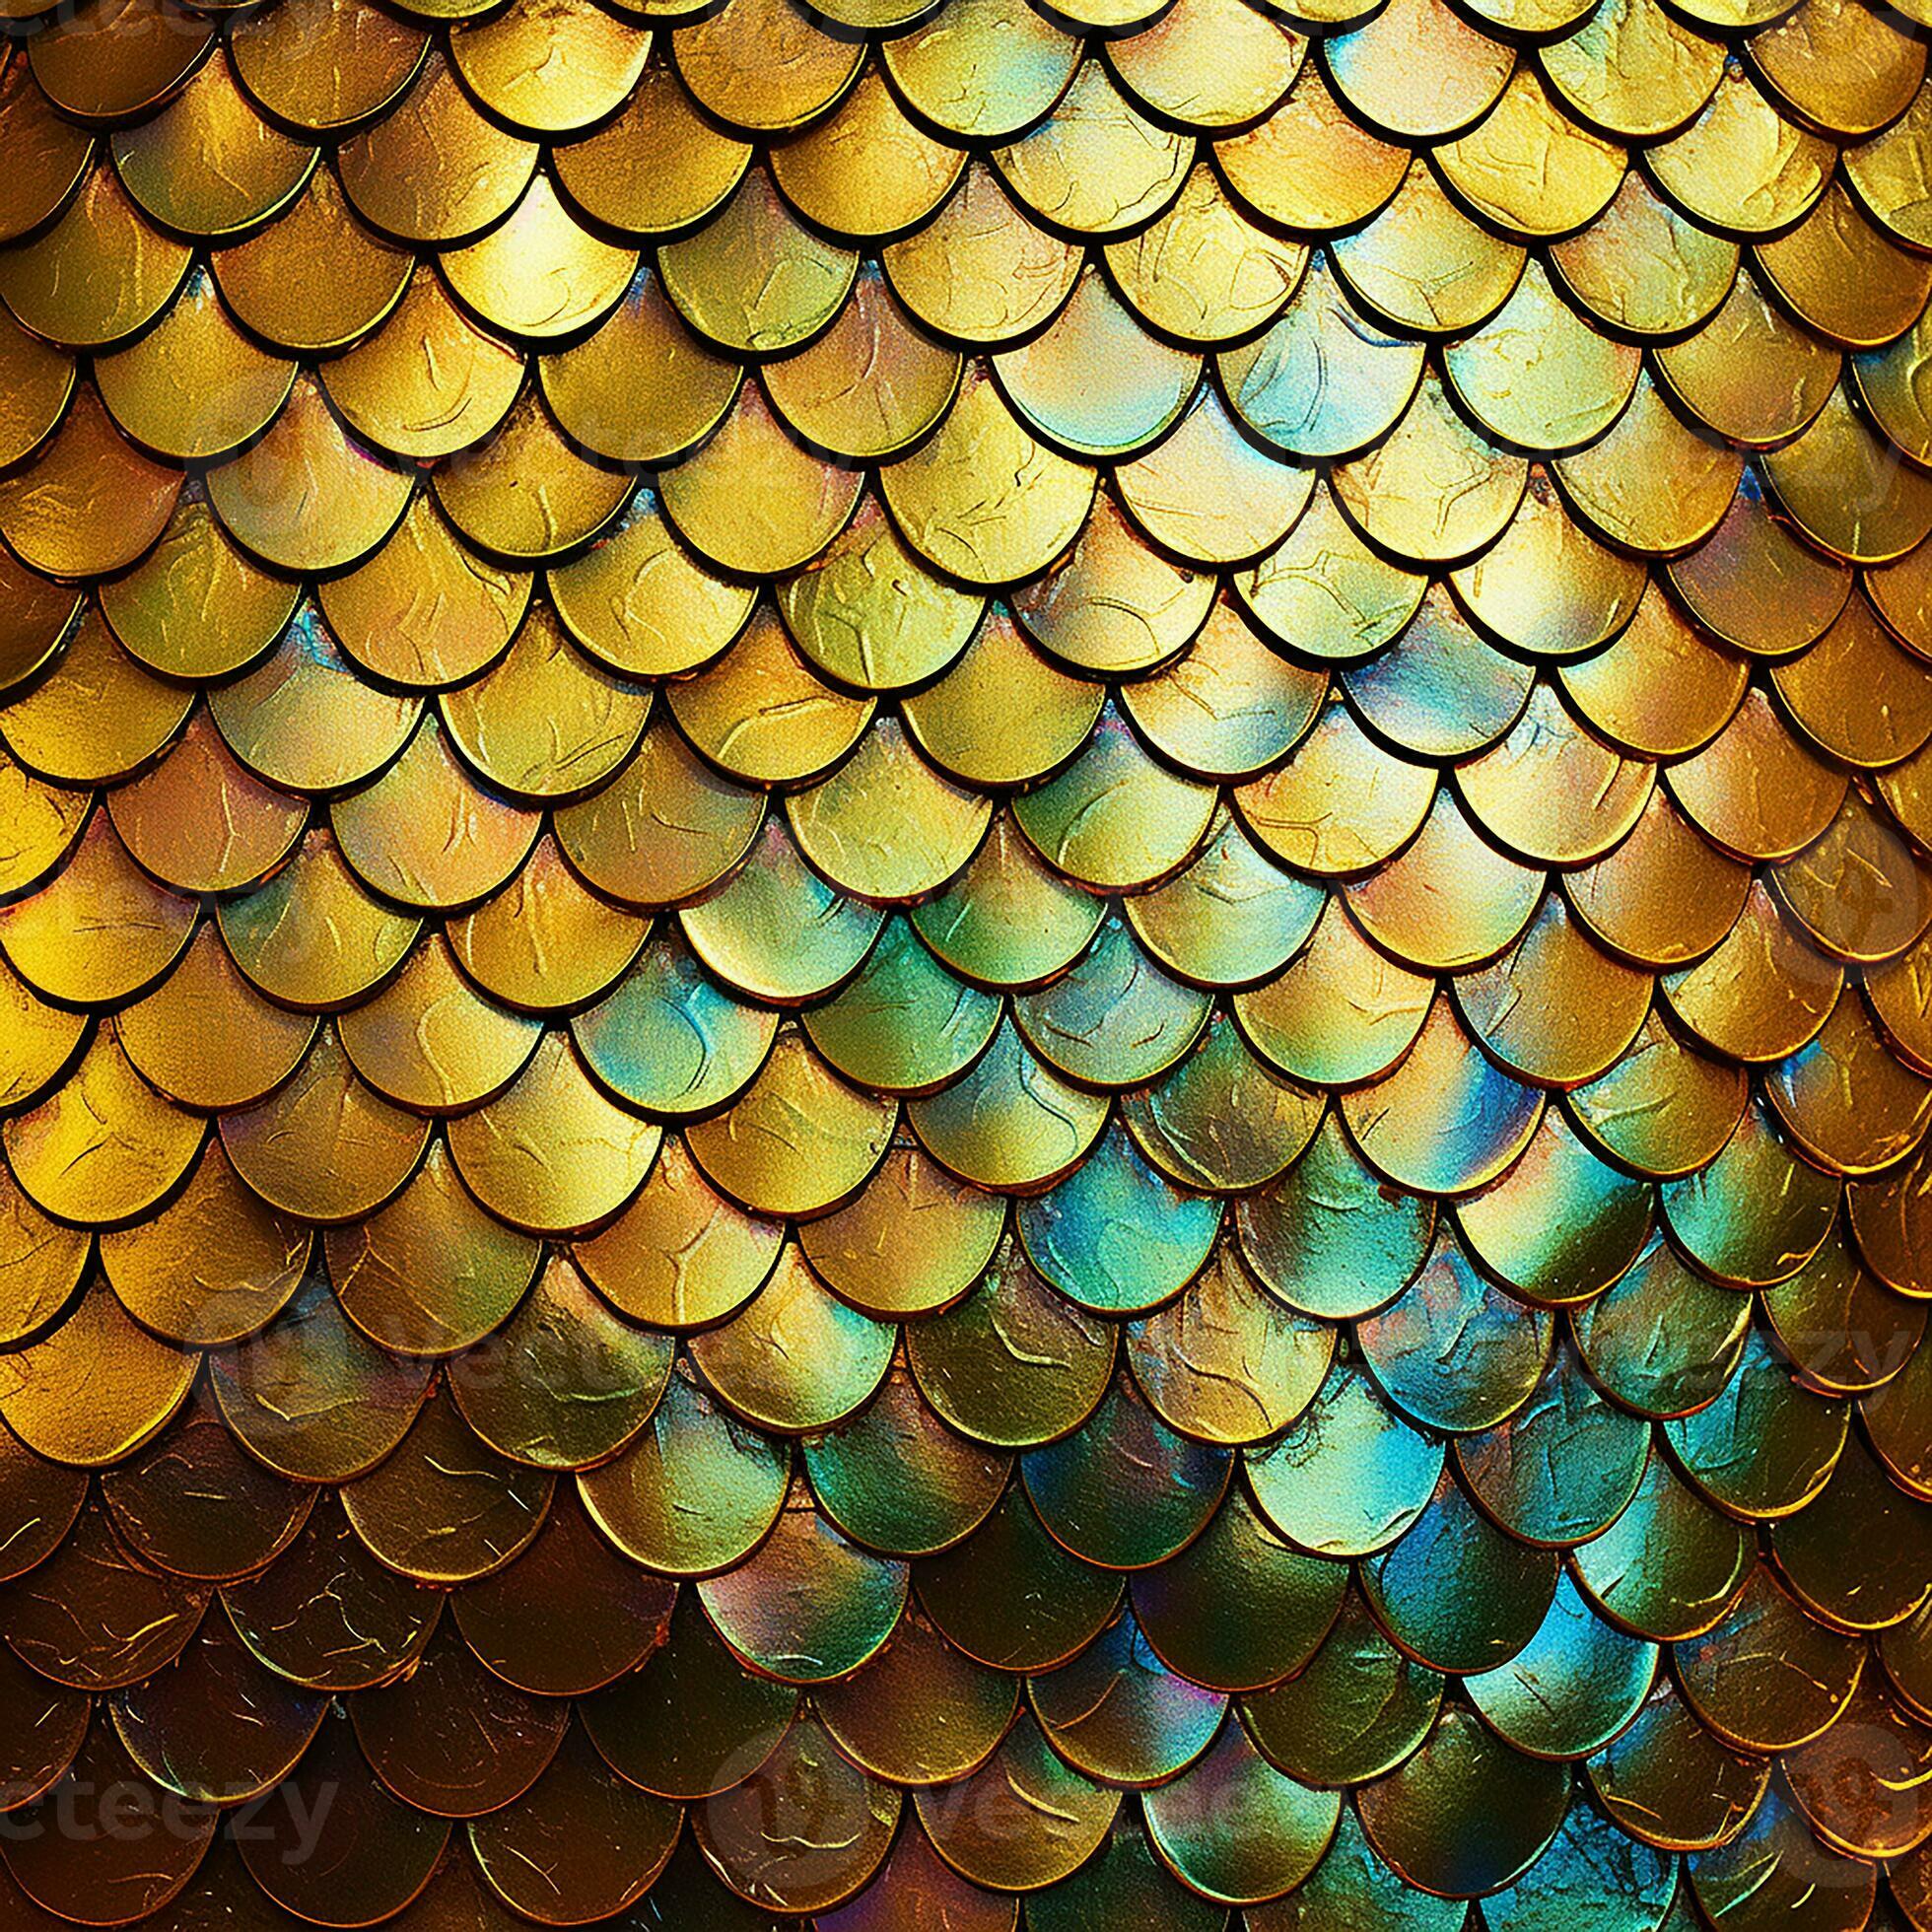 https://static.vecteezy.com/system/resources/previews/029/244/691/large_2x/photorealistic-background-with-rainbow-fish-scales-print-with-golden-iridescent-fish-scales-a-fairy-tale-mermaid-ai-generated-photo.jpg